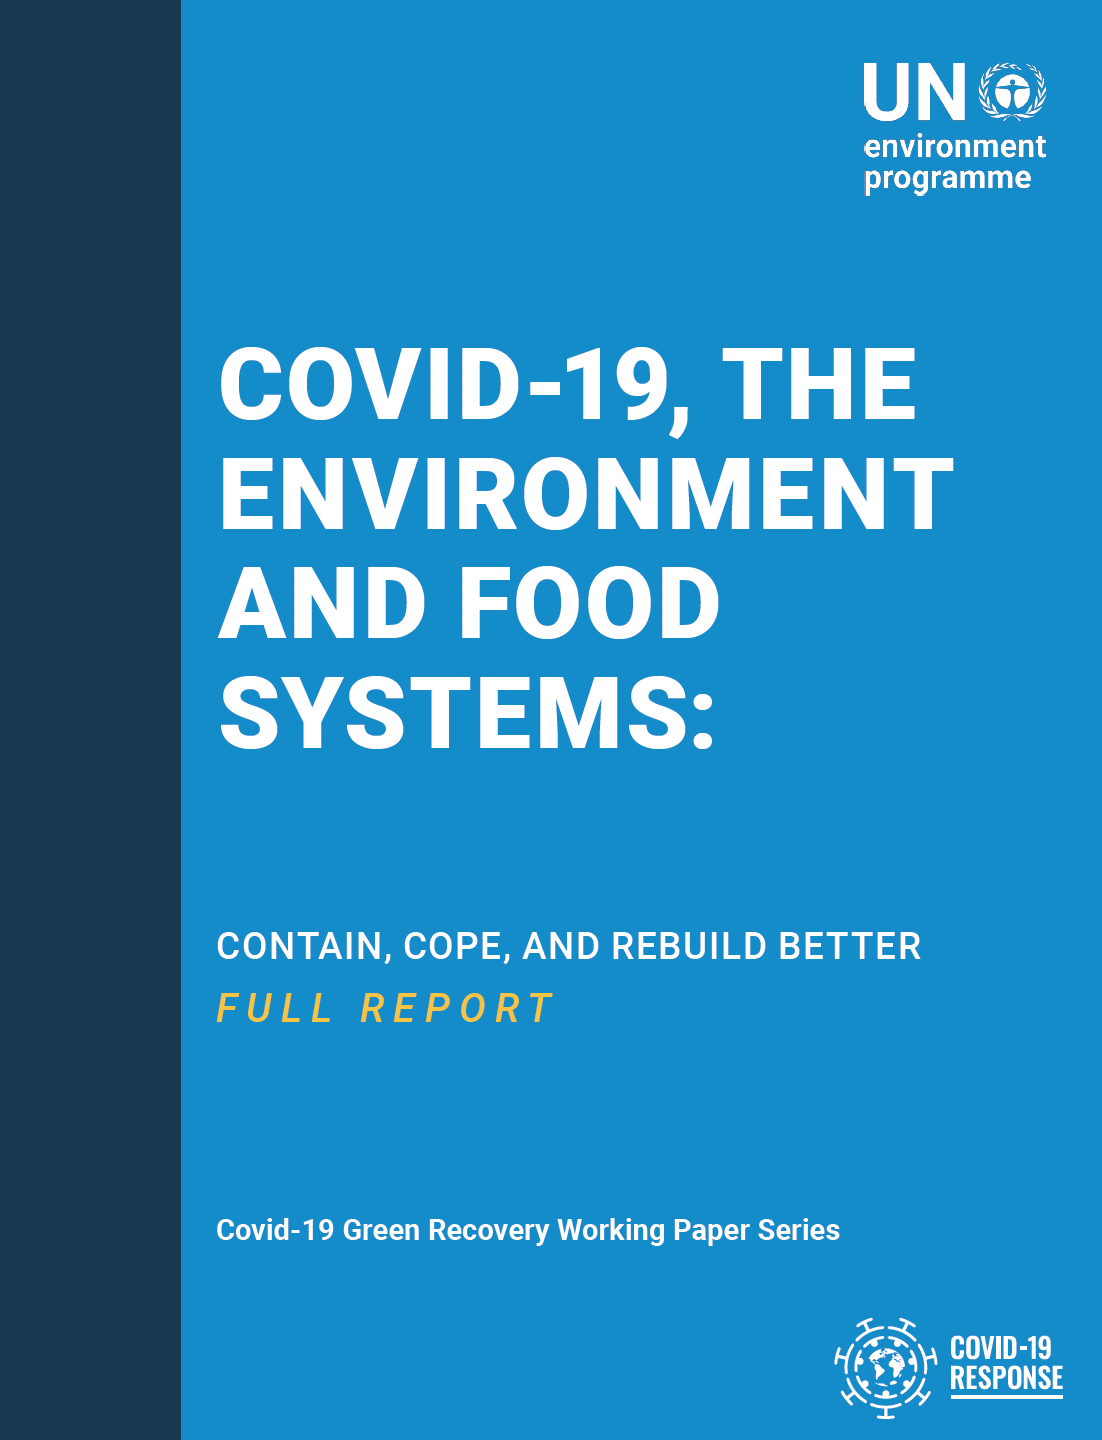 Covid-19, the Environment, and Food Systems: Contain, Cope and Rebuild Better